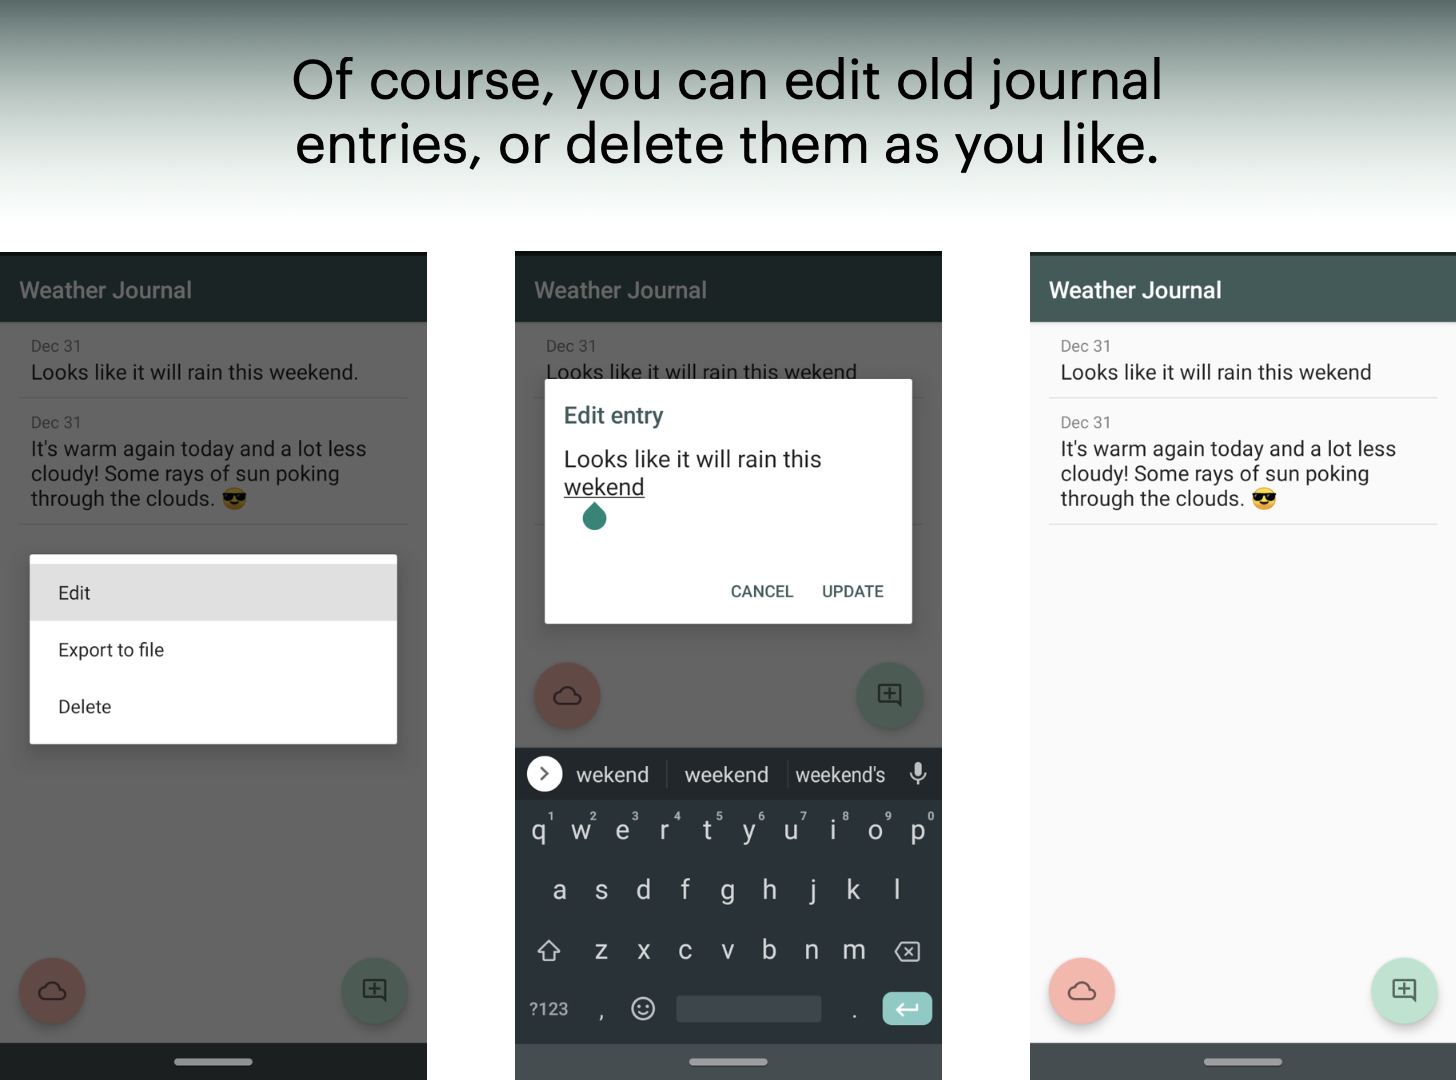 Of course, you can edit ould journal entries, or delete them as you like.